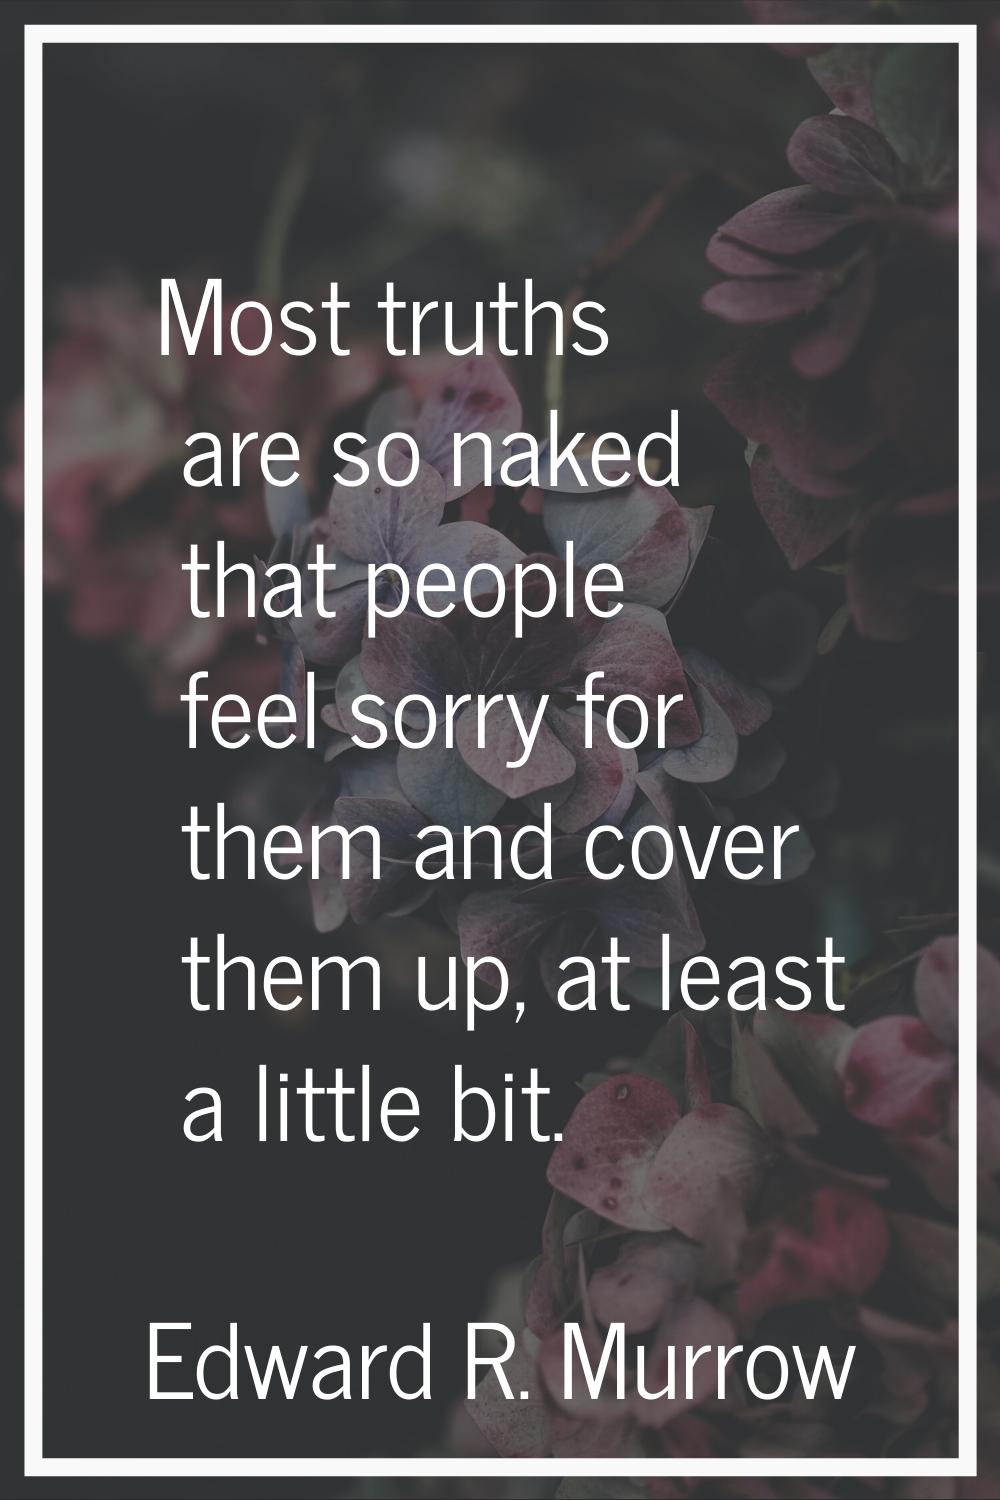 Most truths are so naked that people feel sorry for them and cover them up, at least a little bit.